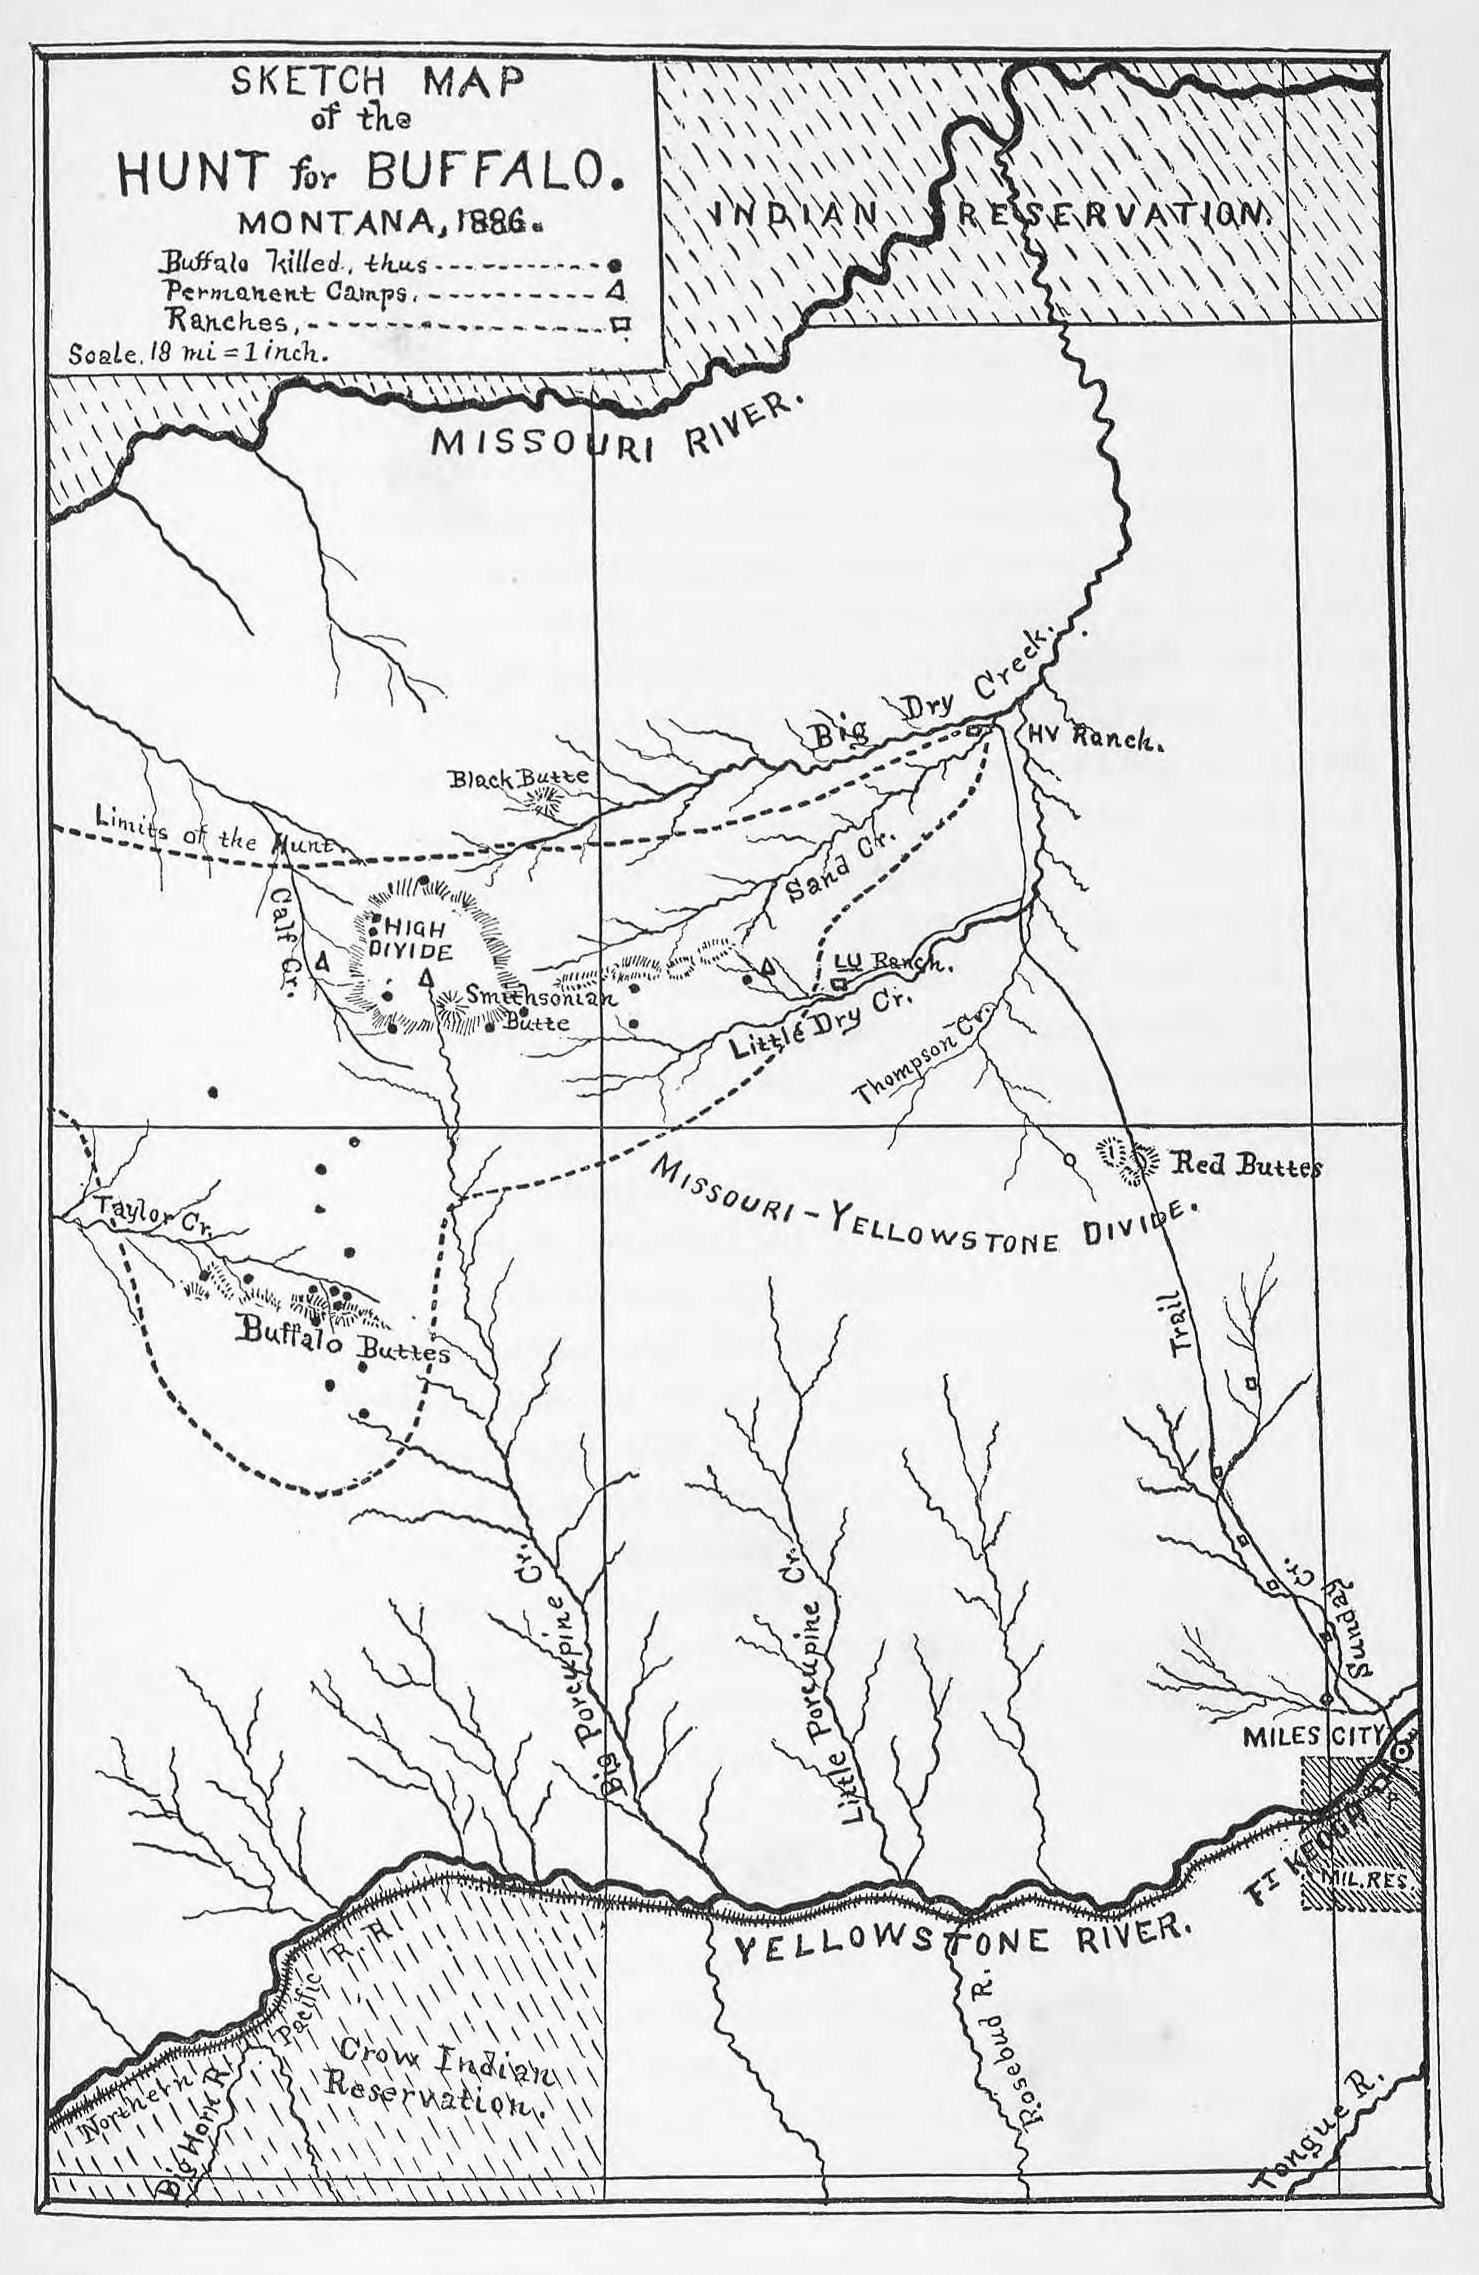 A hand-drawn map of Hornady's bison expedition.